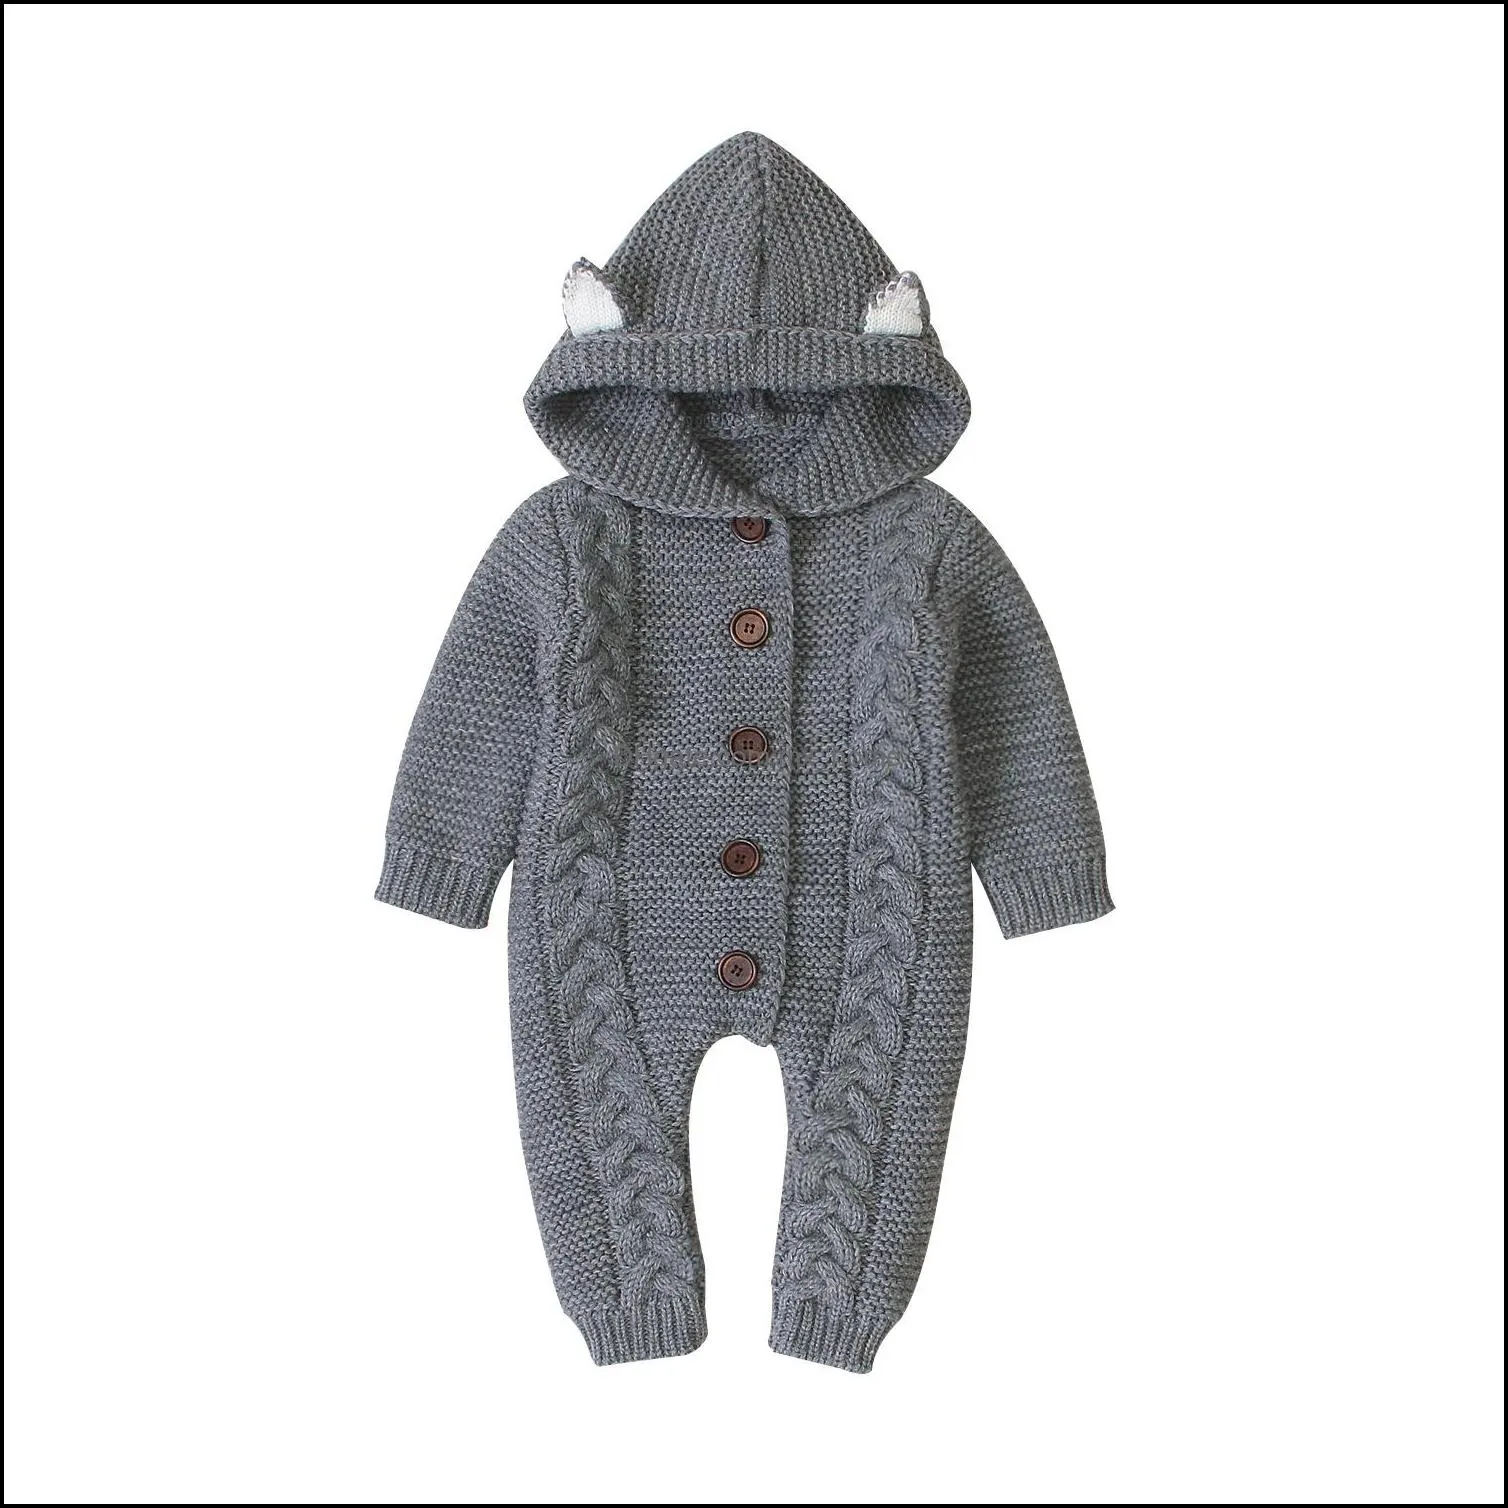 kids rompers boys girls knitting romper infant toddler knit hooded jumpsuits autumn winter fashion boutique baby climbing clothes